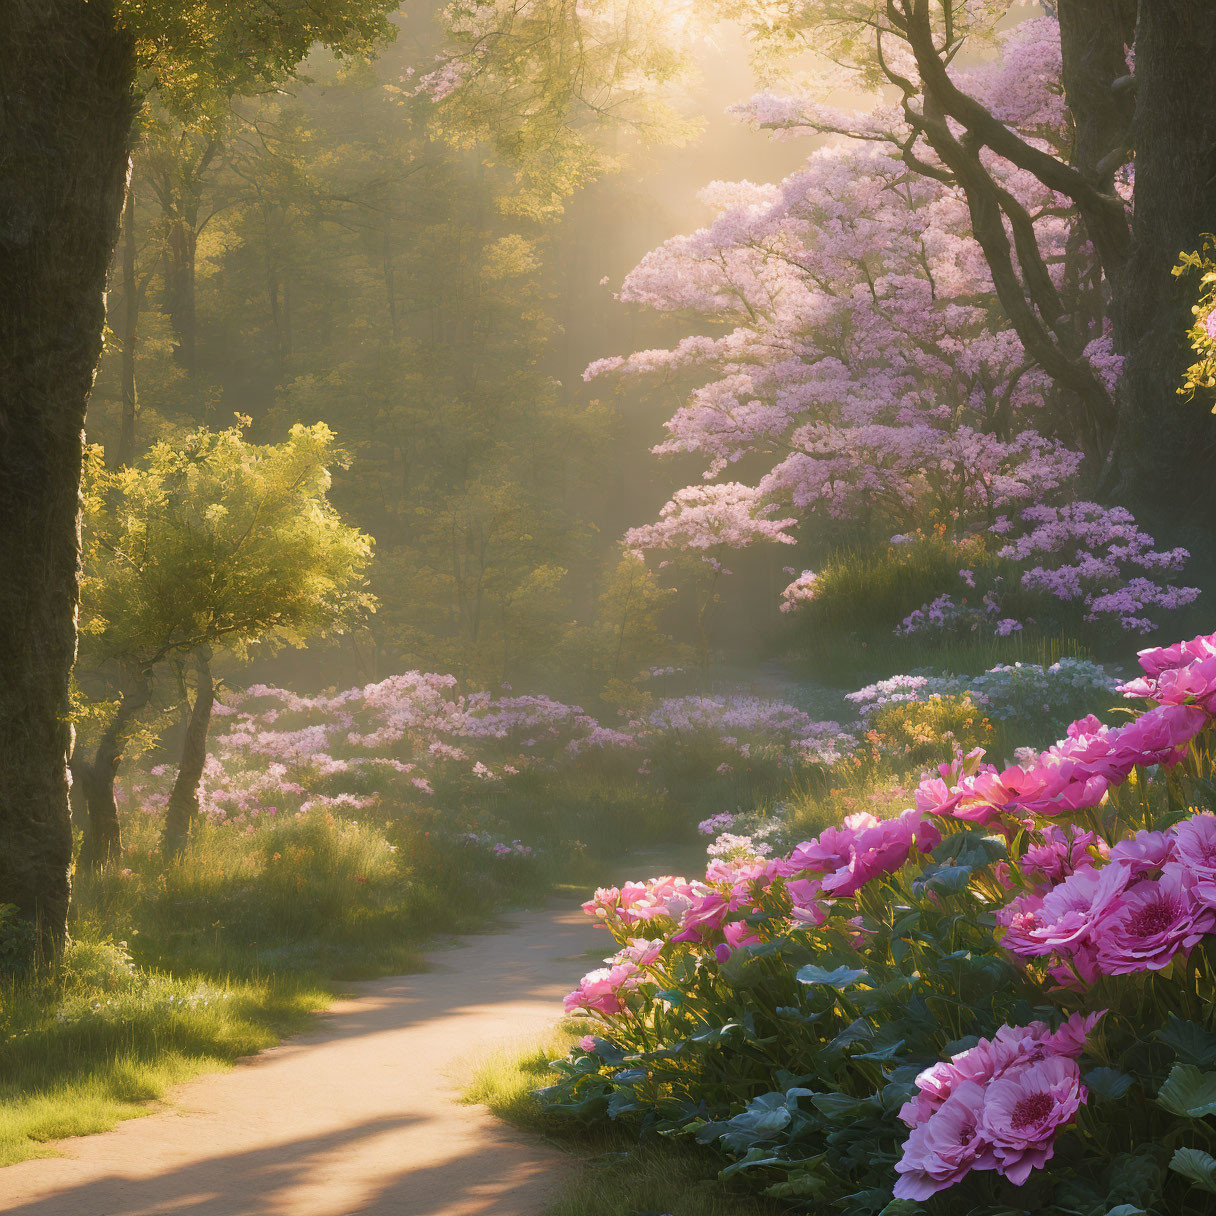 Tranquil Path with Green Trees and Pink Flowers at Dawn